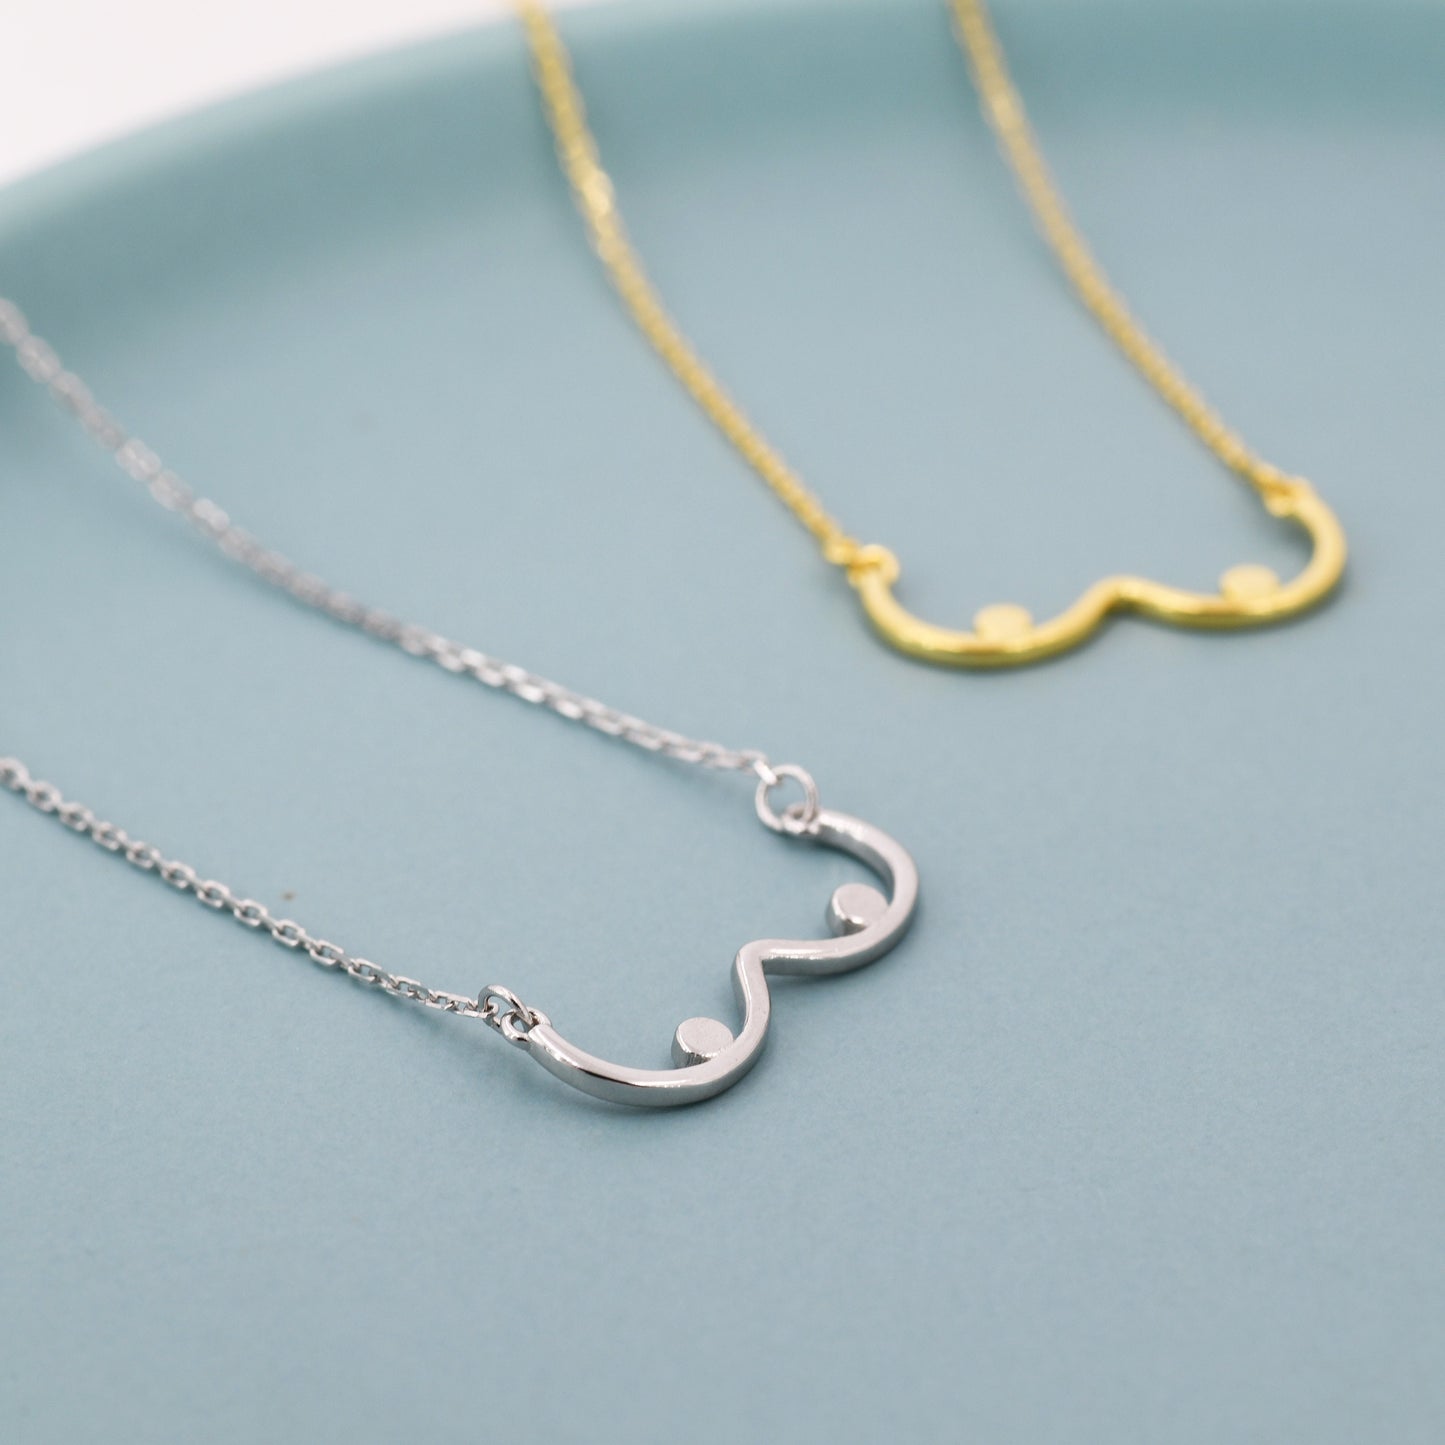 Boob Pendant Necklace in Sterling Silver, Breast Pendant, Silver or Gold, Feminist Jewellery,